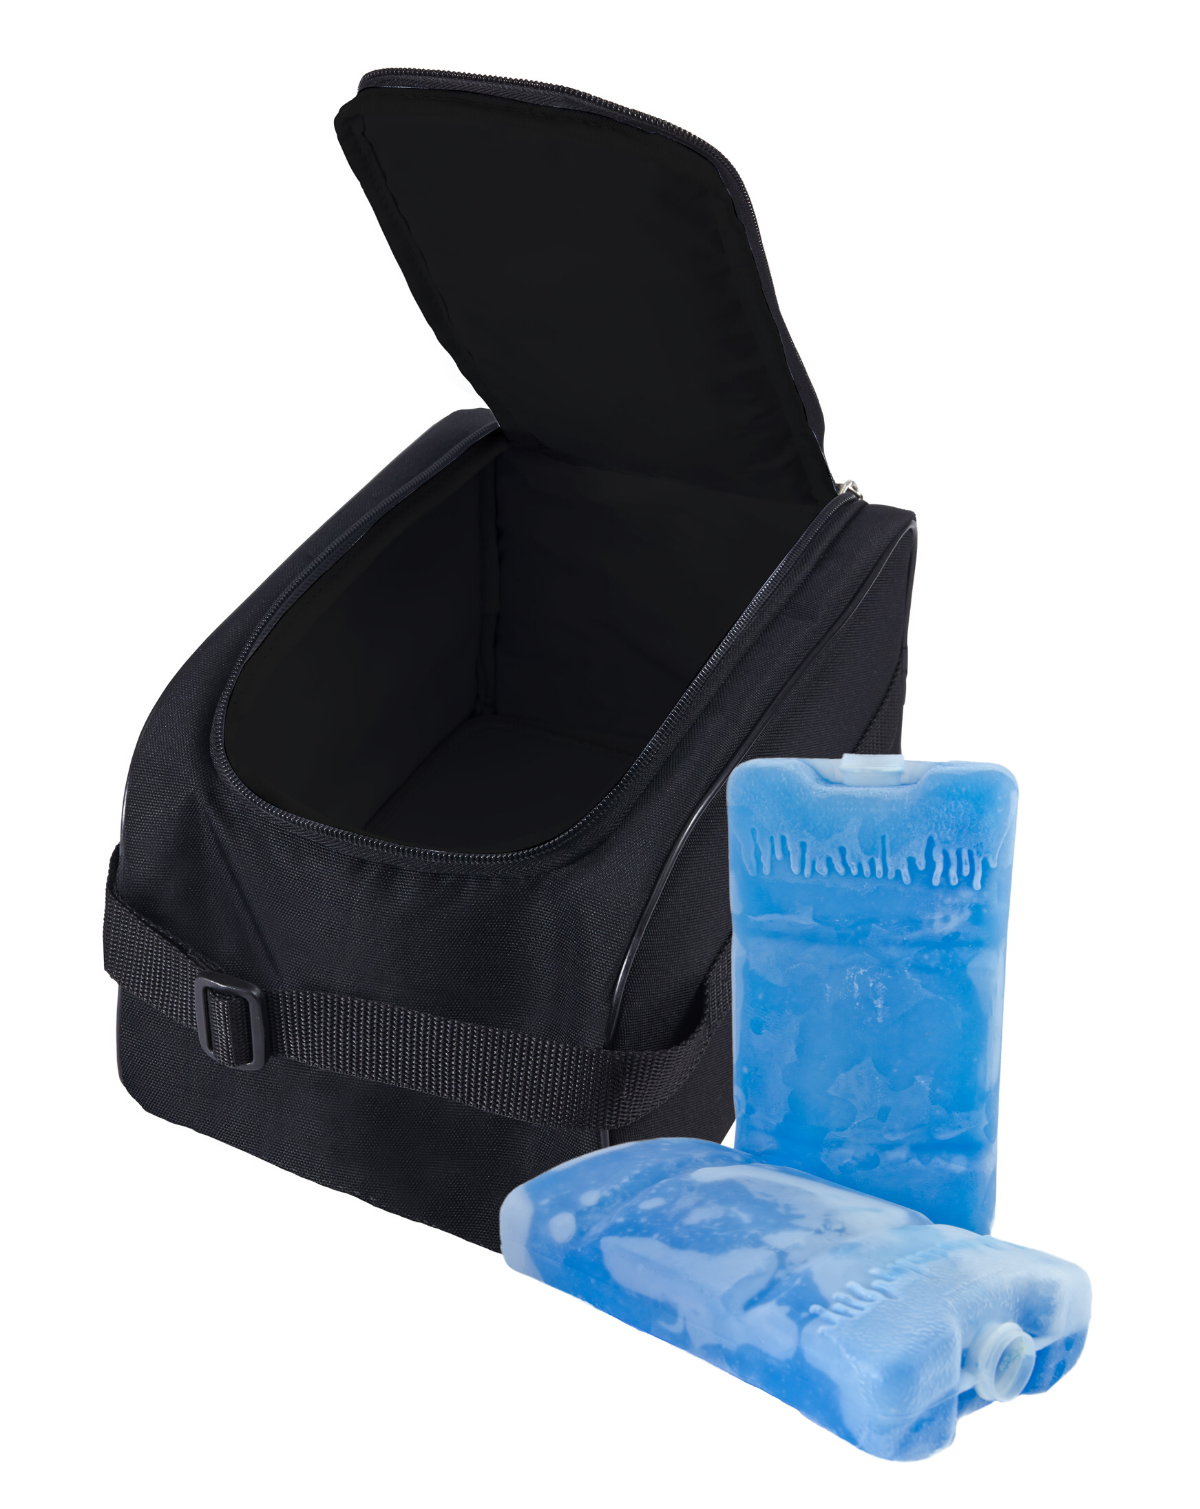 EZ/Transit Cart Accessory Pouch OR Cooler- Make Your Selection